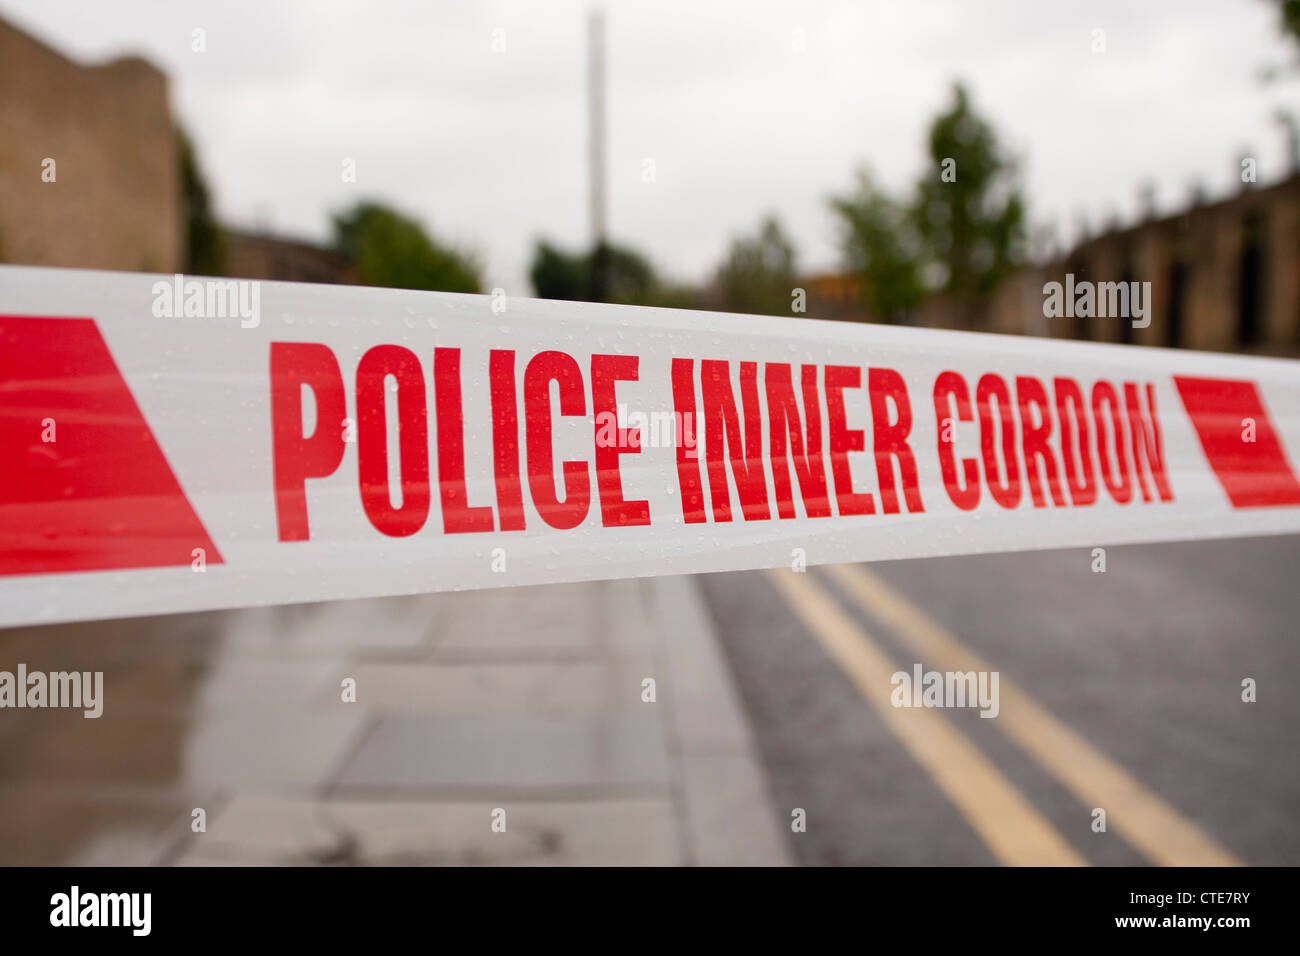 Police tape for crime scene, 'Police Inner cordon'. red on white, generic  blurred background with double yellow lines Stock Photo - Alamy